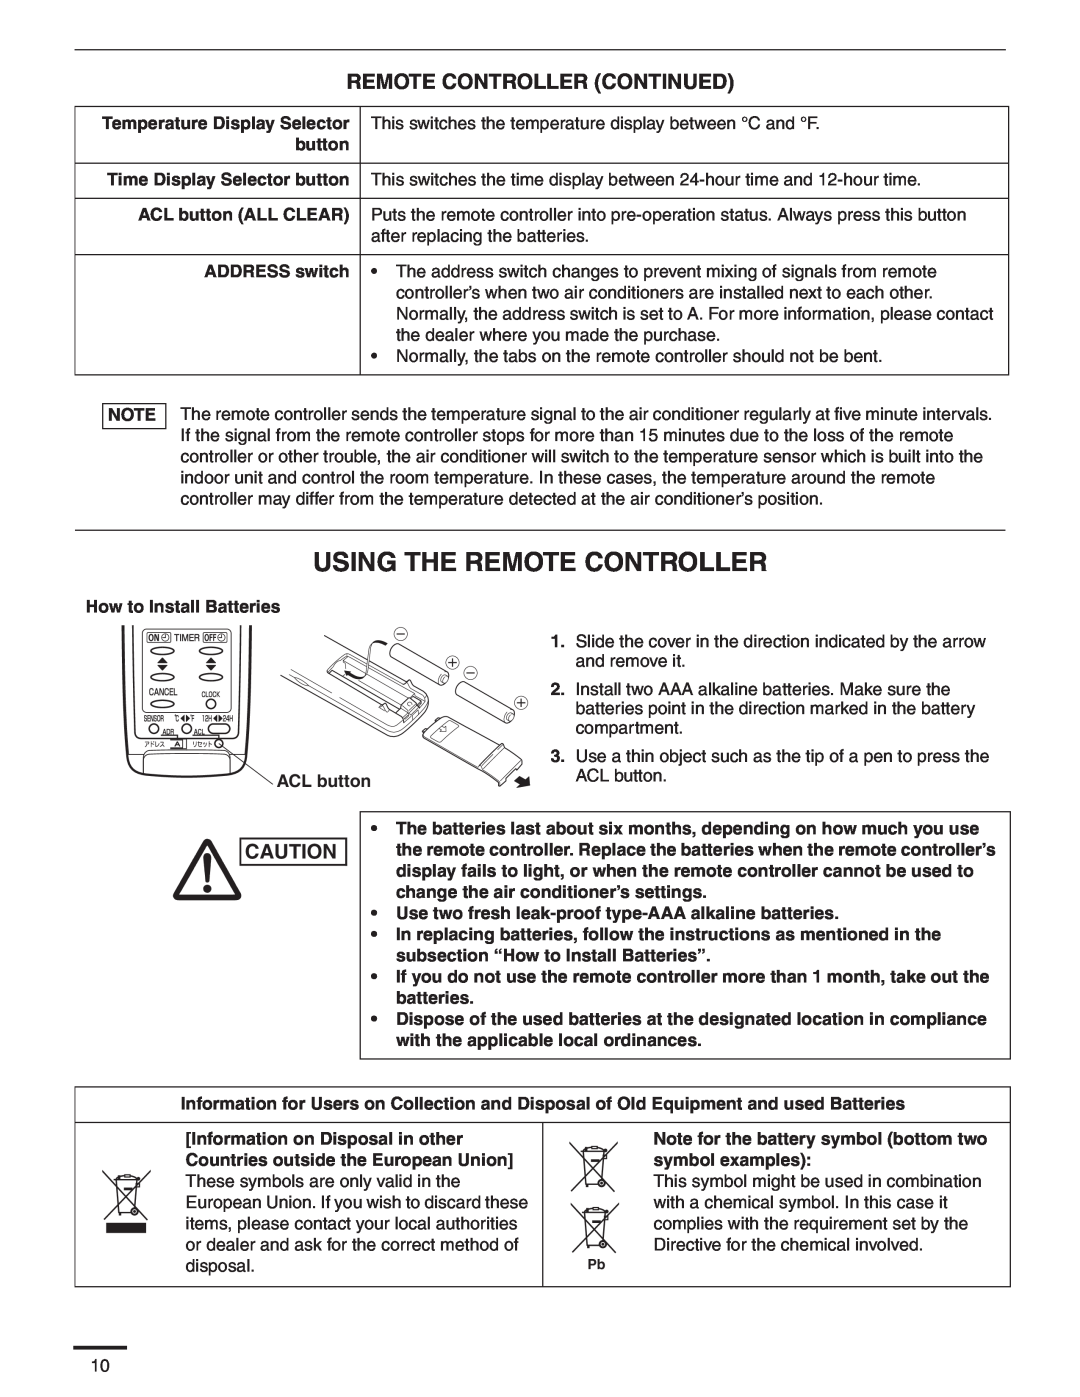 Panasonic CS-MKS24NKU, CS-MKS9NKU, CS-MKS18NKU service manual Using The Remote Controller, Remote Controller Continued 